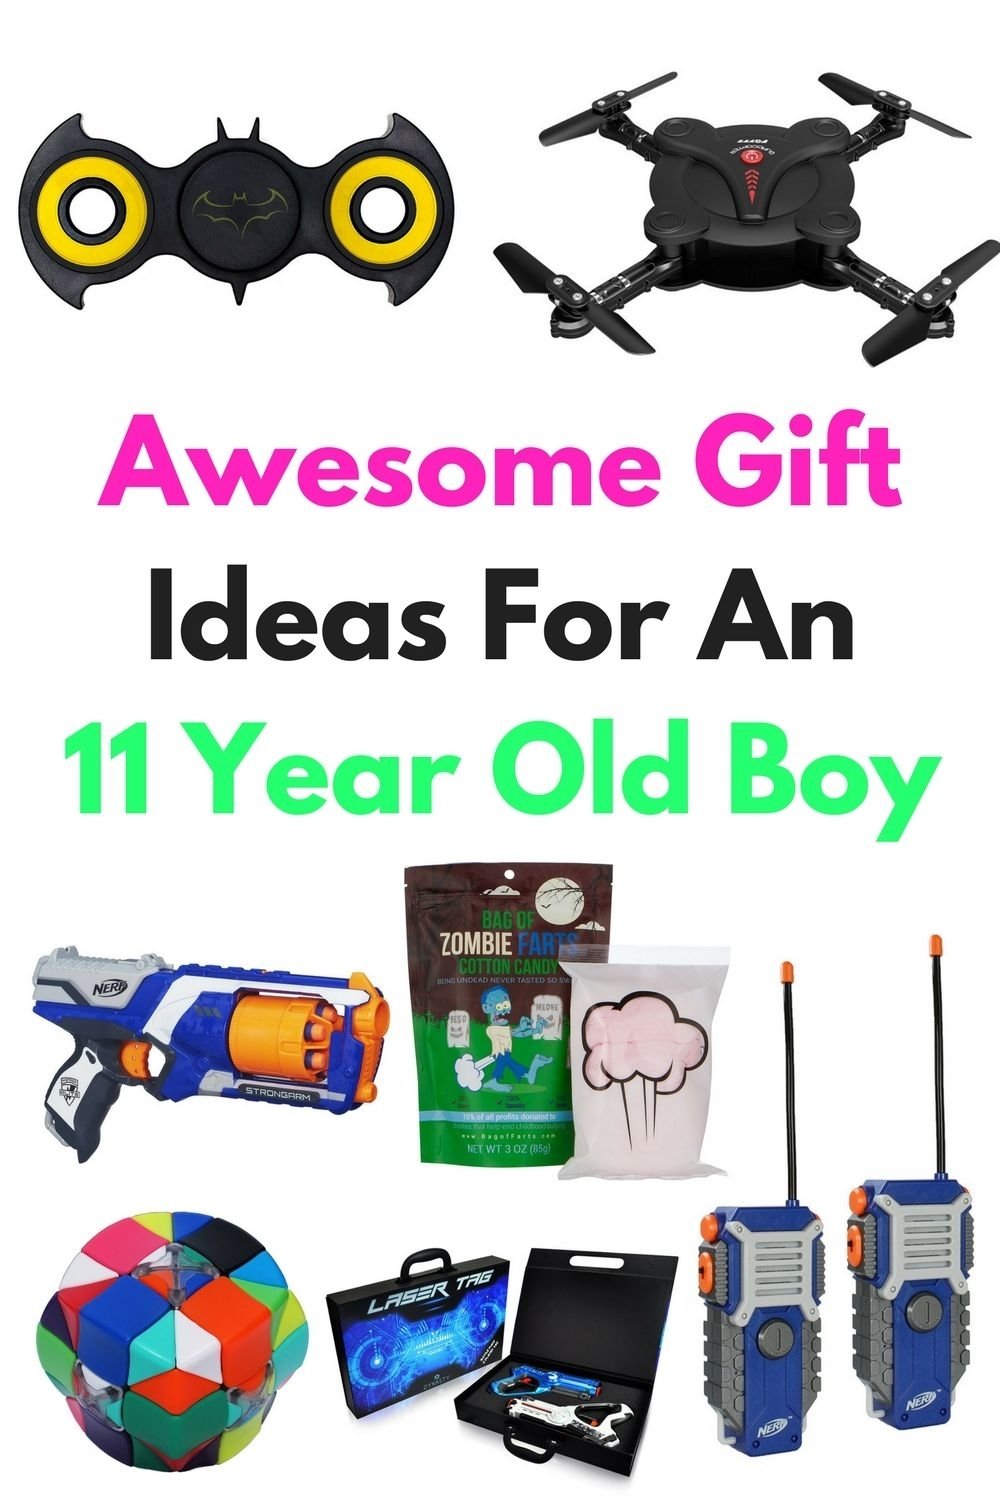 10 Attractive 12 Year Old Boy Christmas Gift Ideas awesome gift ideas for an 11 year old boy awesome gifts easter 3 2022